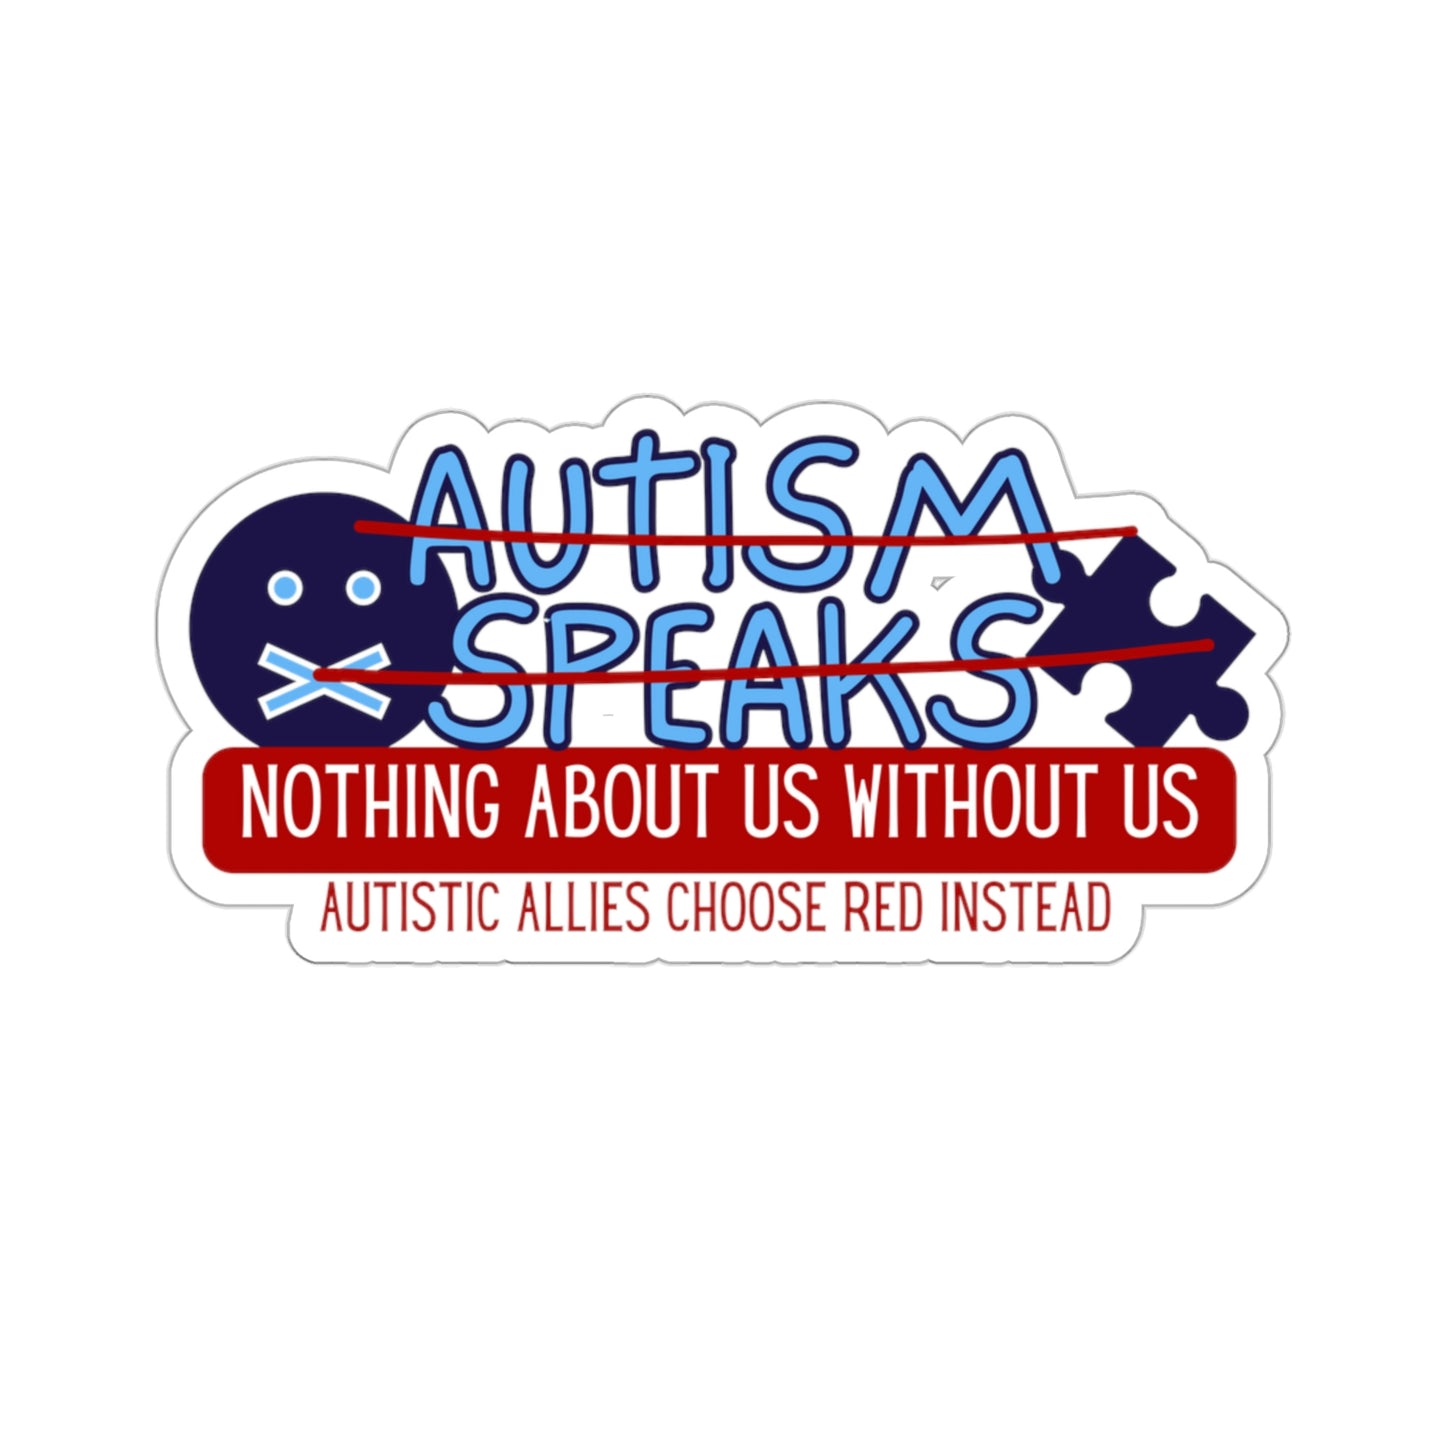 Say No to Autism Speaks Kiss-Cut Stickers